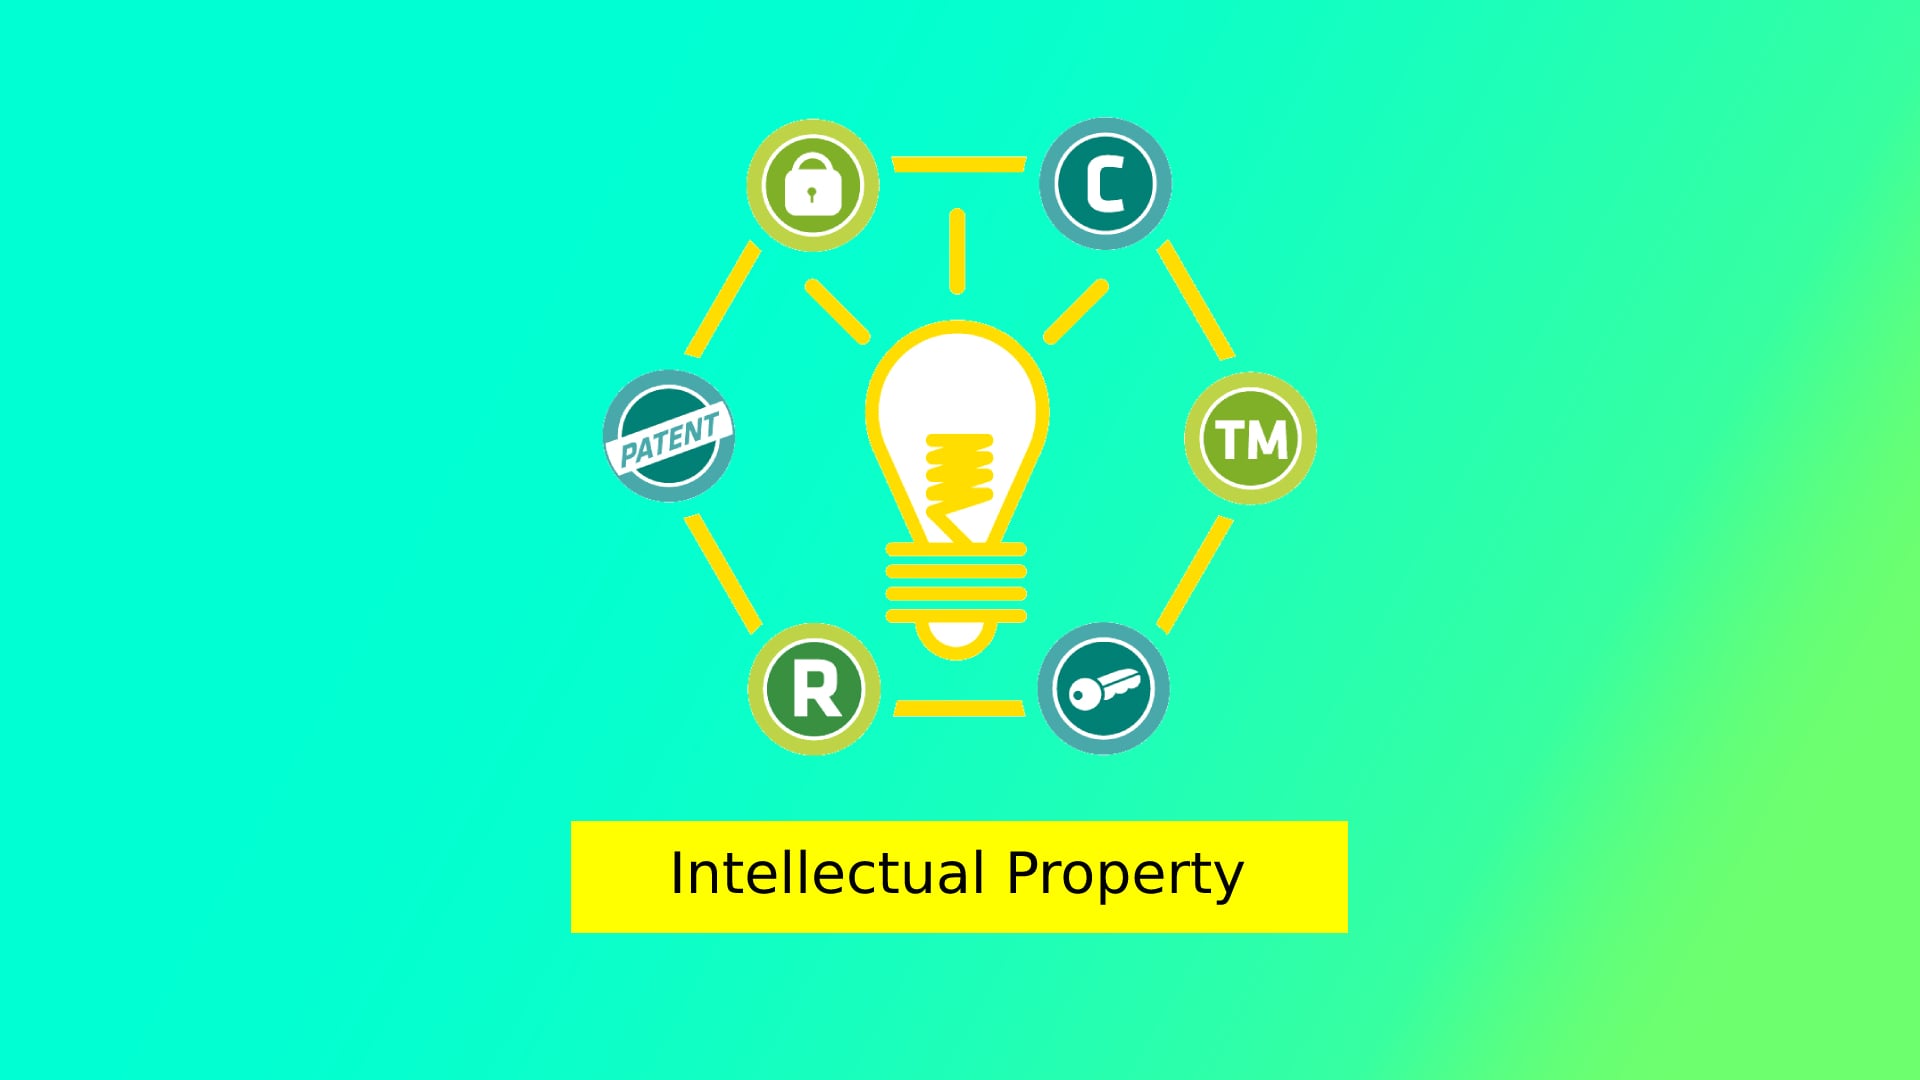 The Ultimate Guide to Protecting your Intellectual Property